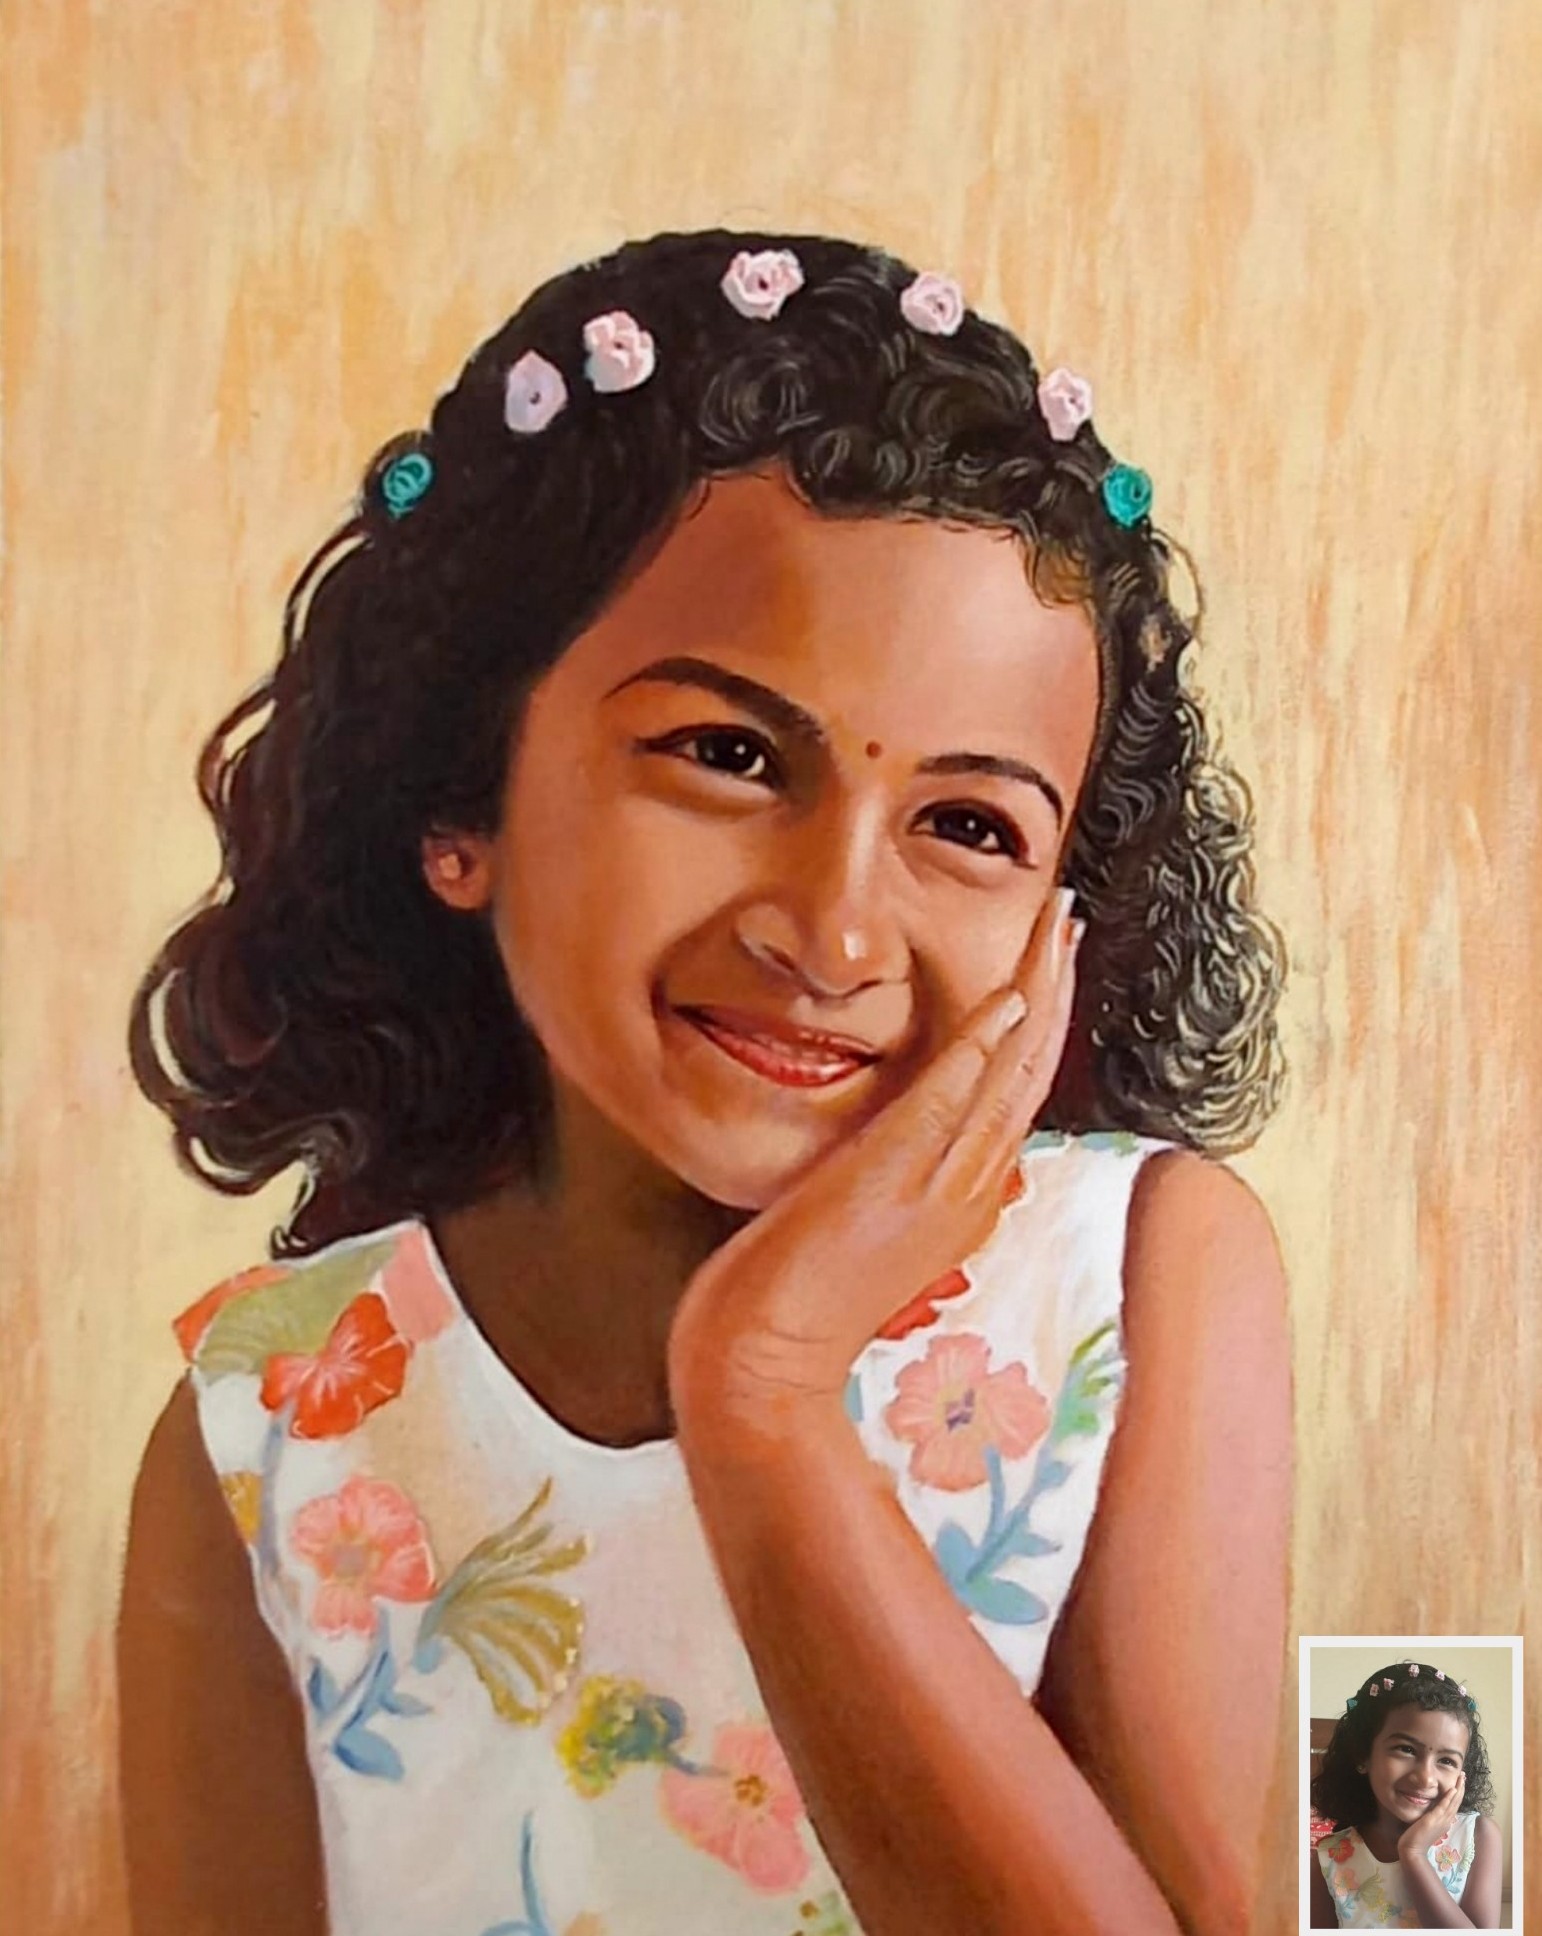 smiling young girl oil portrait painting, child portrait painting, painting from photo, photo paint